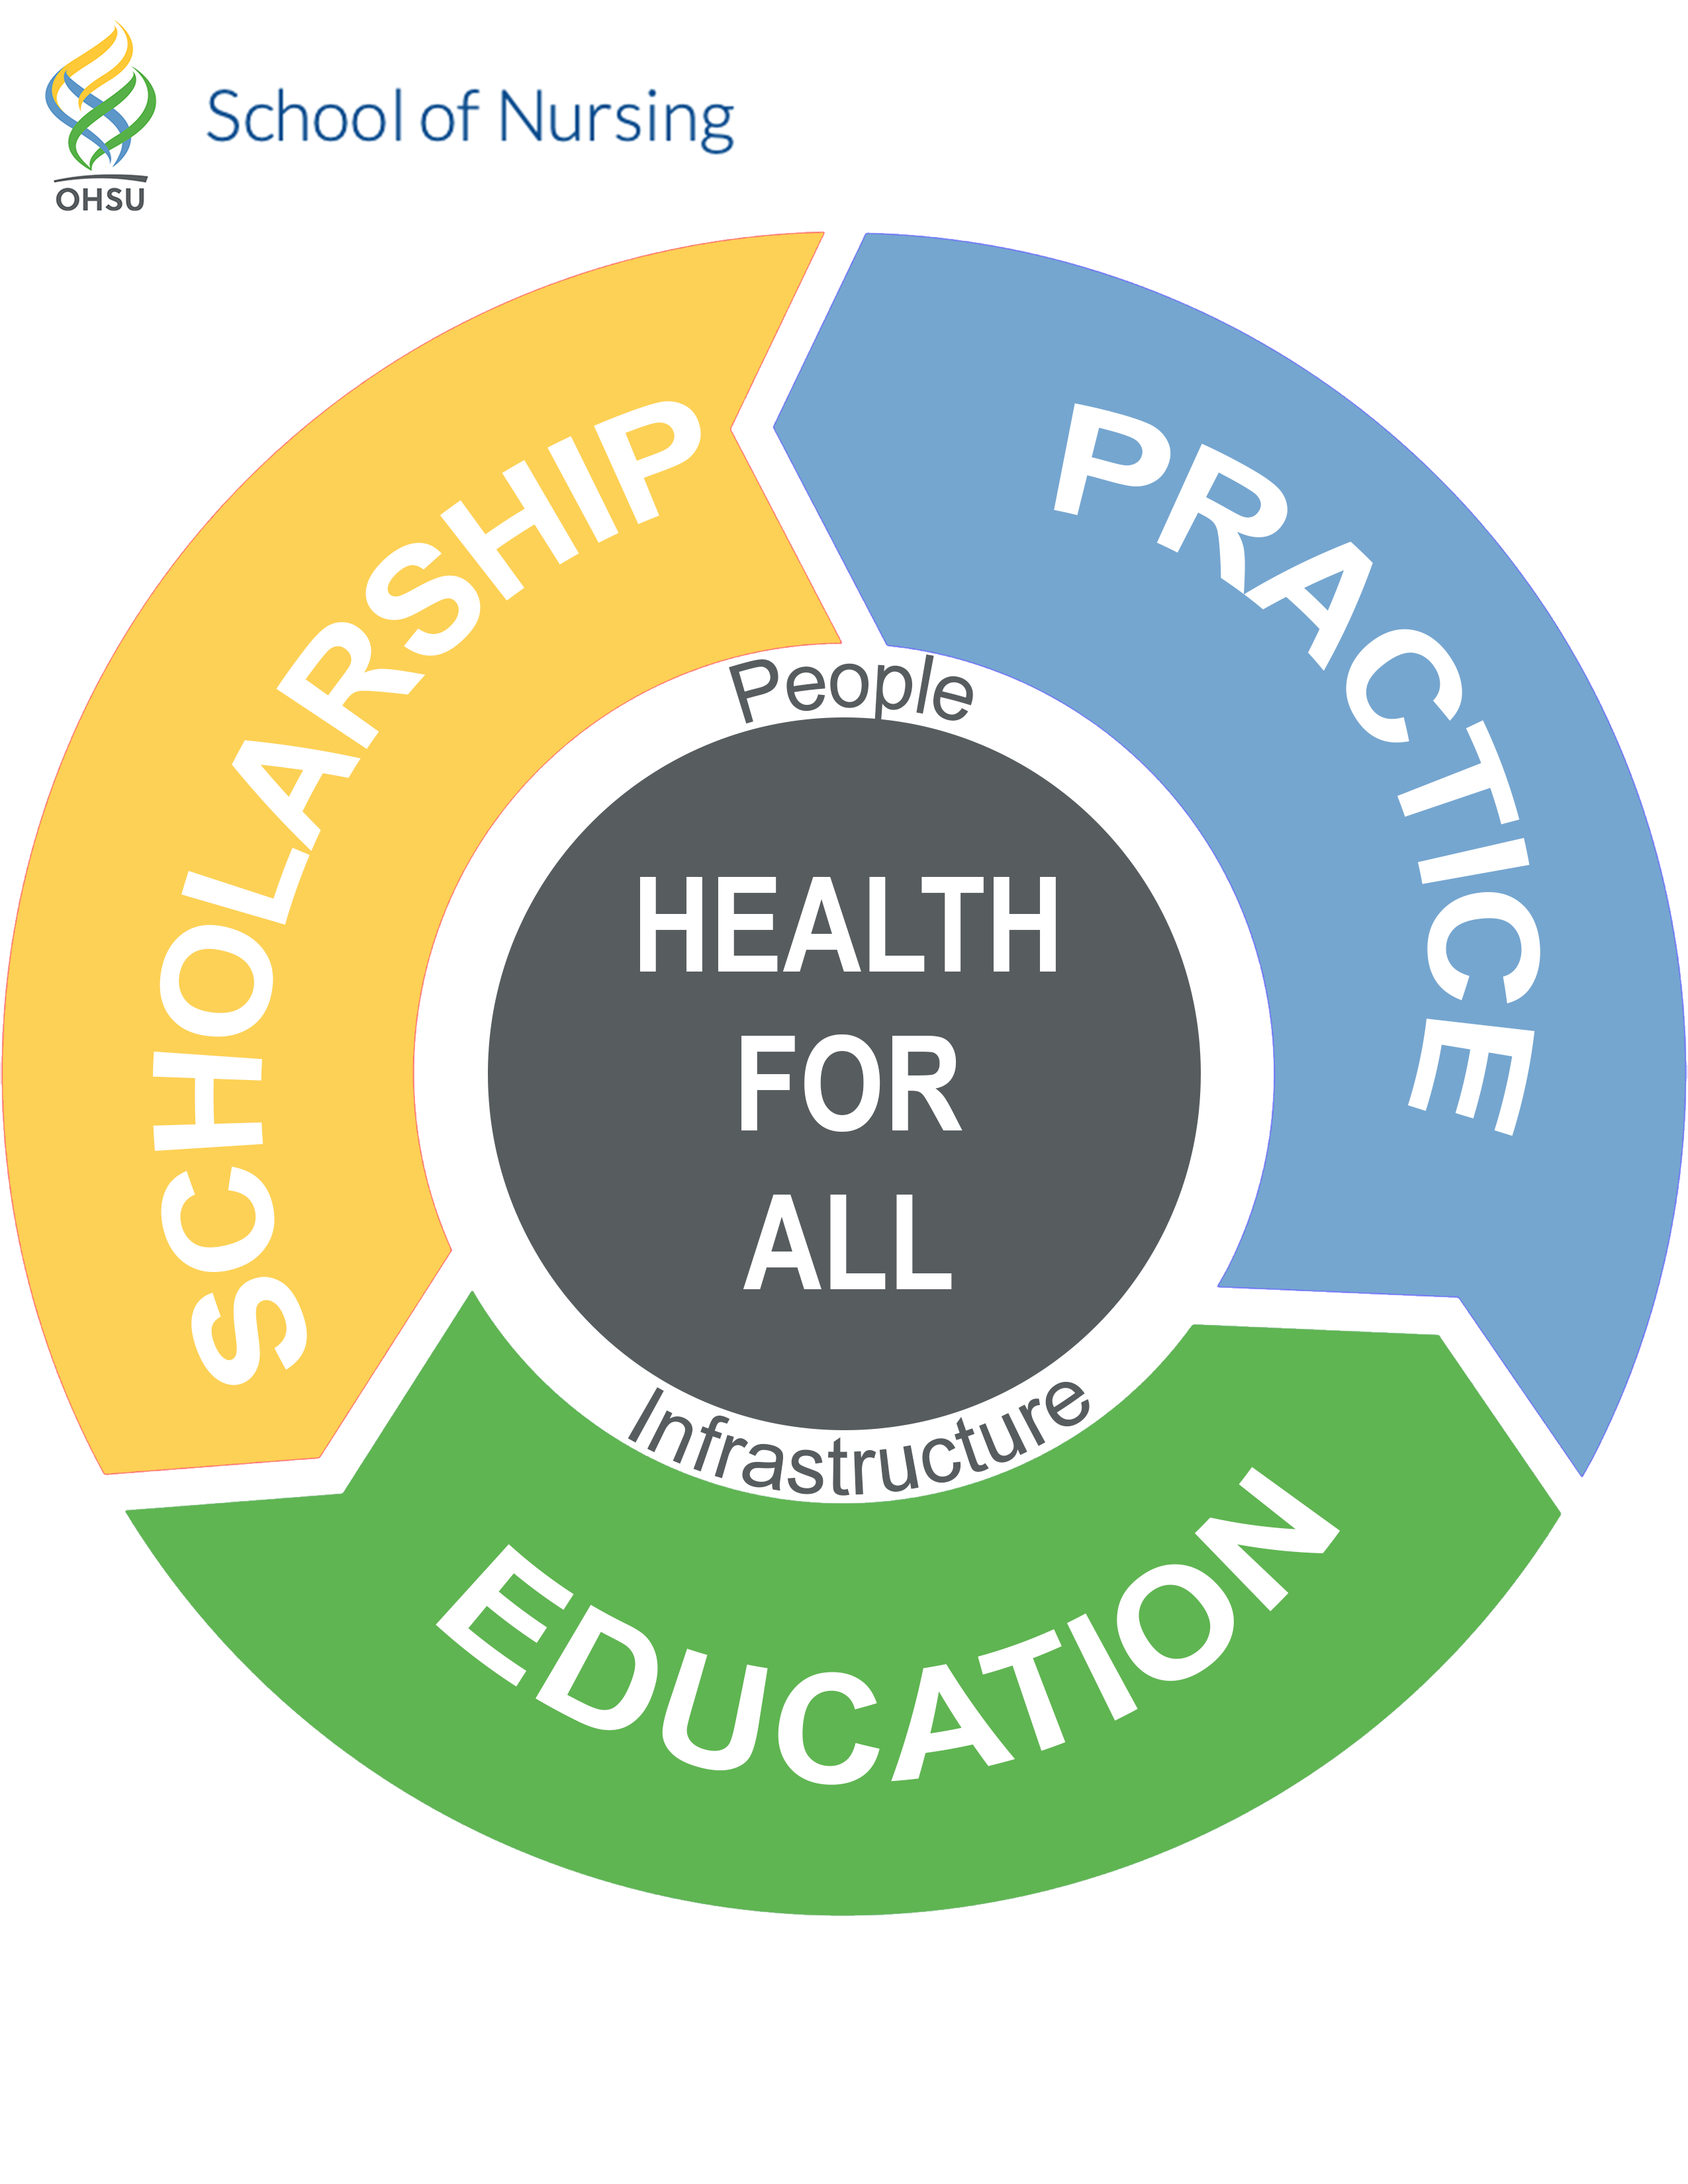 A circular pathway to Health for All, with the words Scholarship, Practice, and Education formatted in a circle to represent how important all three are to each other